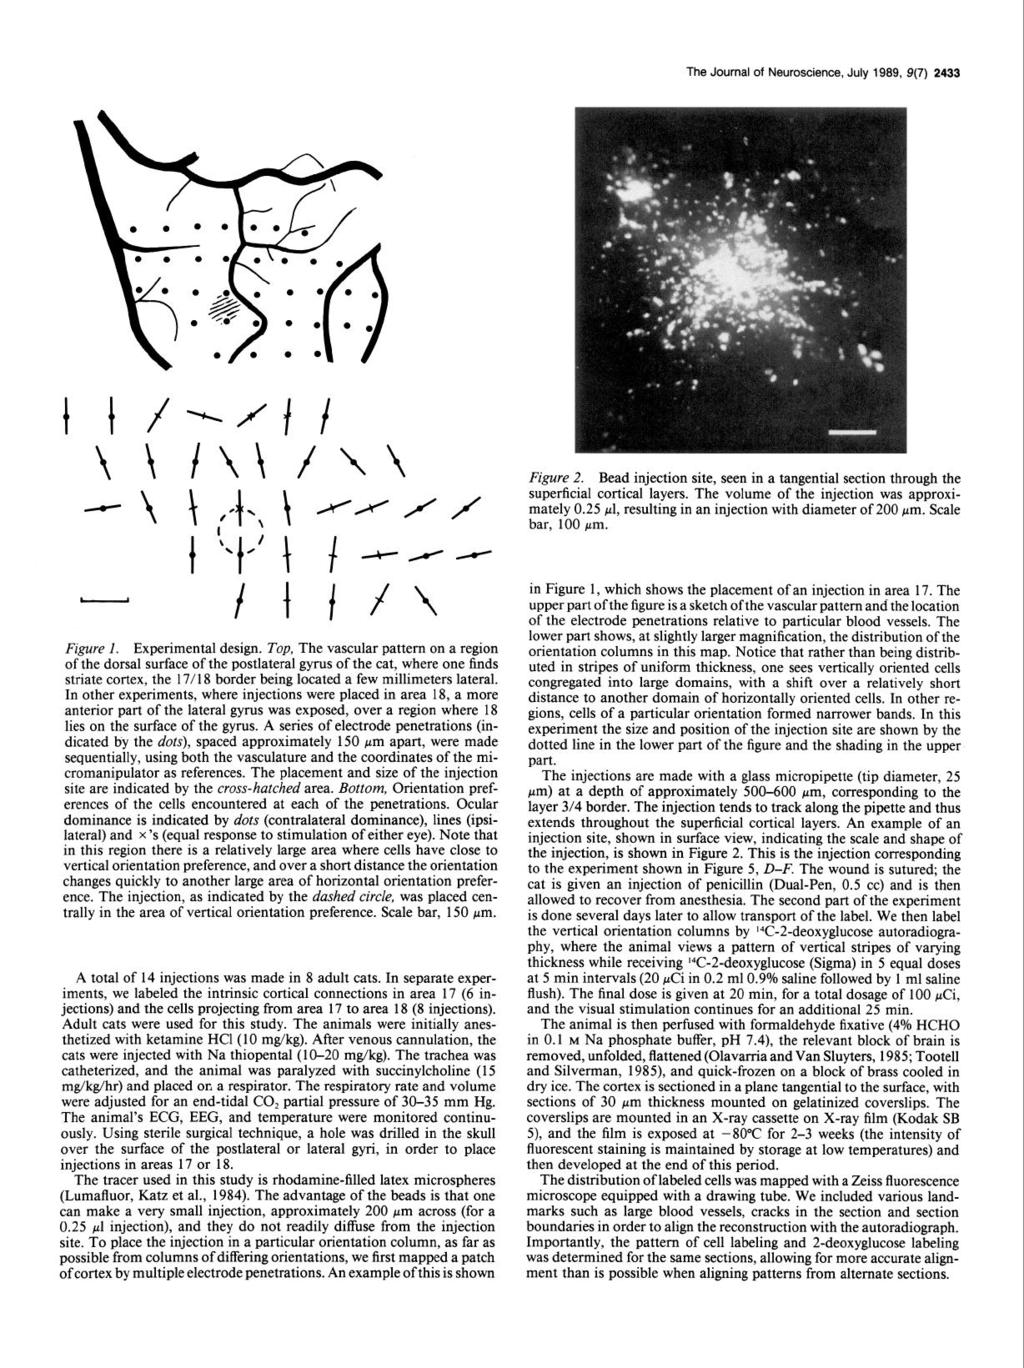 The Journal of Neuroscience, July 1989, 9(7) 2433 Figure 2. Bead injection site, seen in a tangential section through the superficial cortical layers. The volume of the injection was approximately 0.